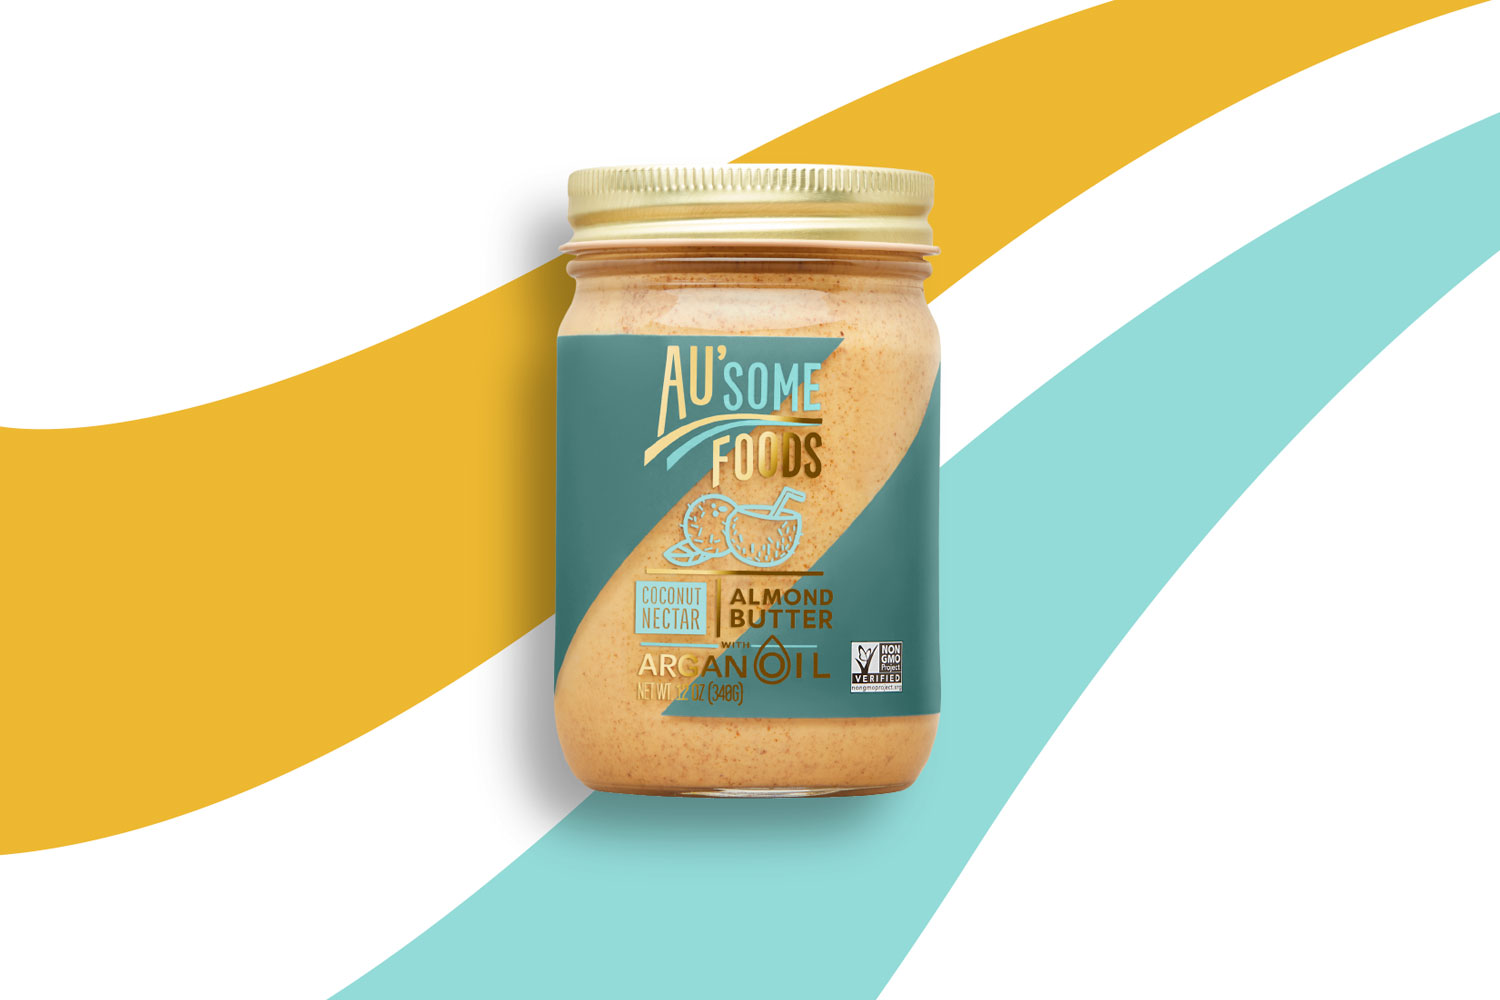 Au’some Food Almond Butter Packaging Design